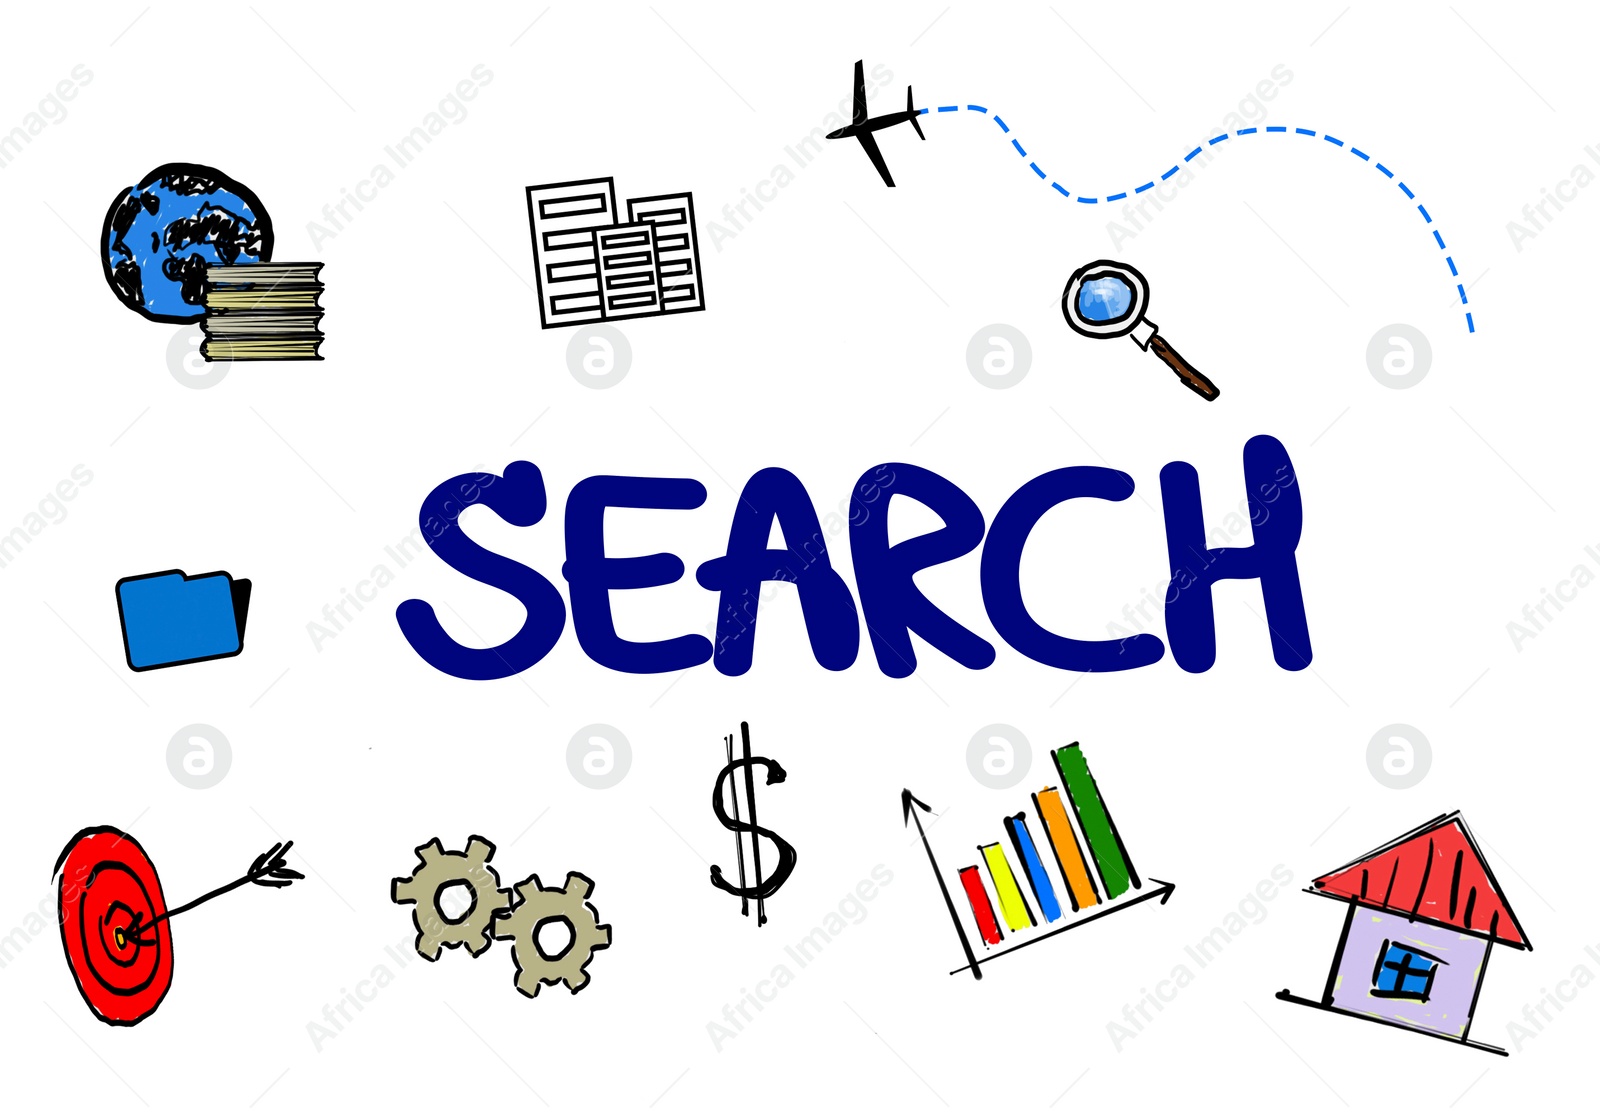 Illustration of SEO concept. Word SEARCH and different drawings on white background, illustration